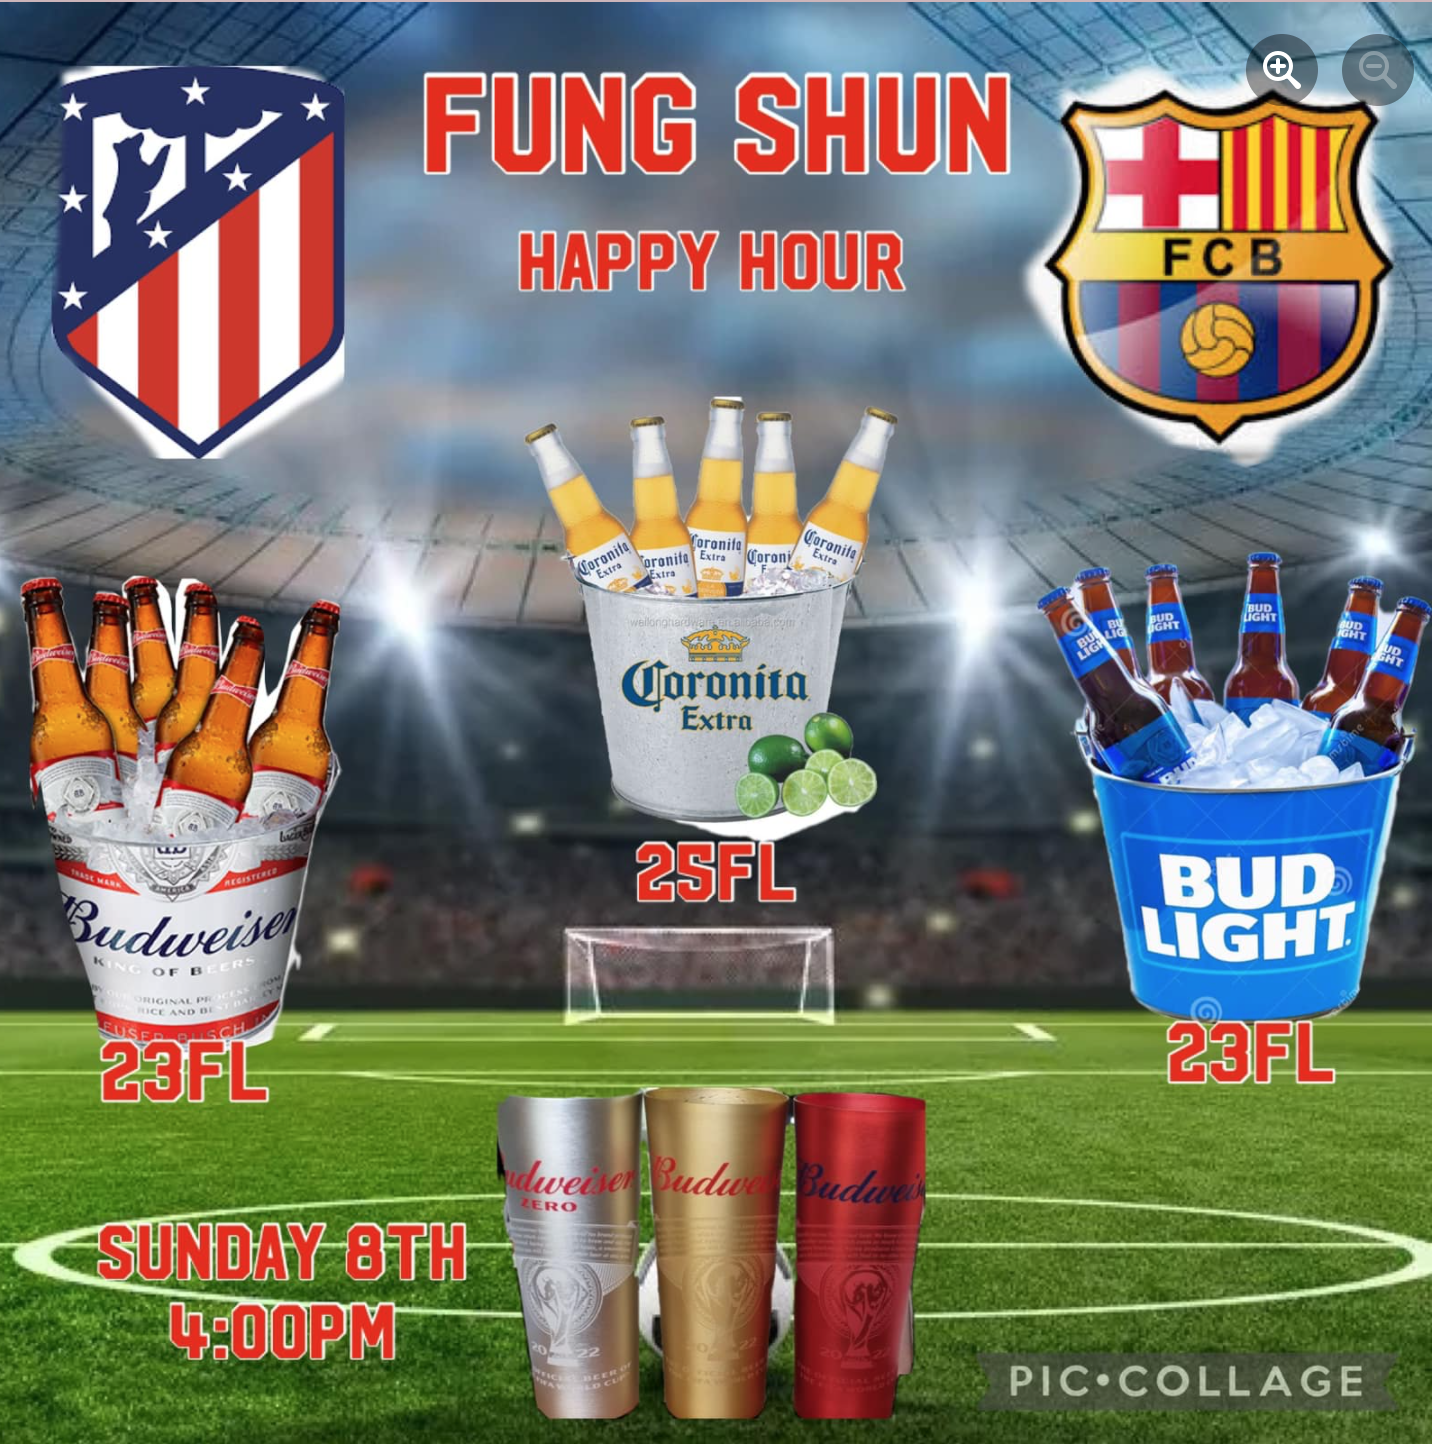 FUNG SHUNG - HAPPY HOUR